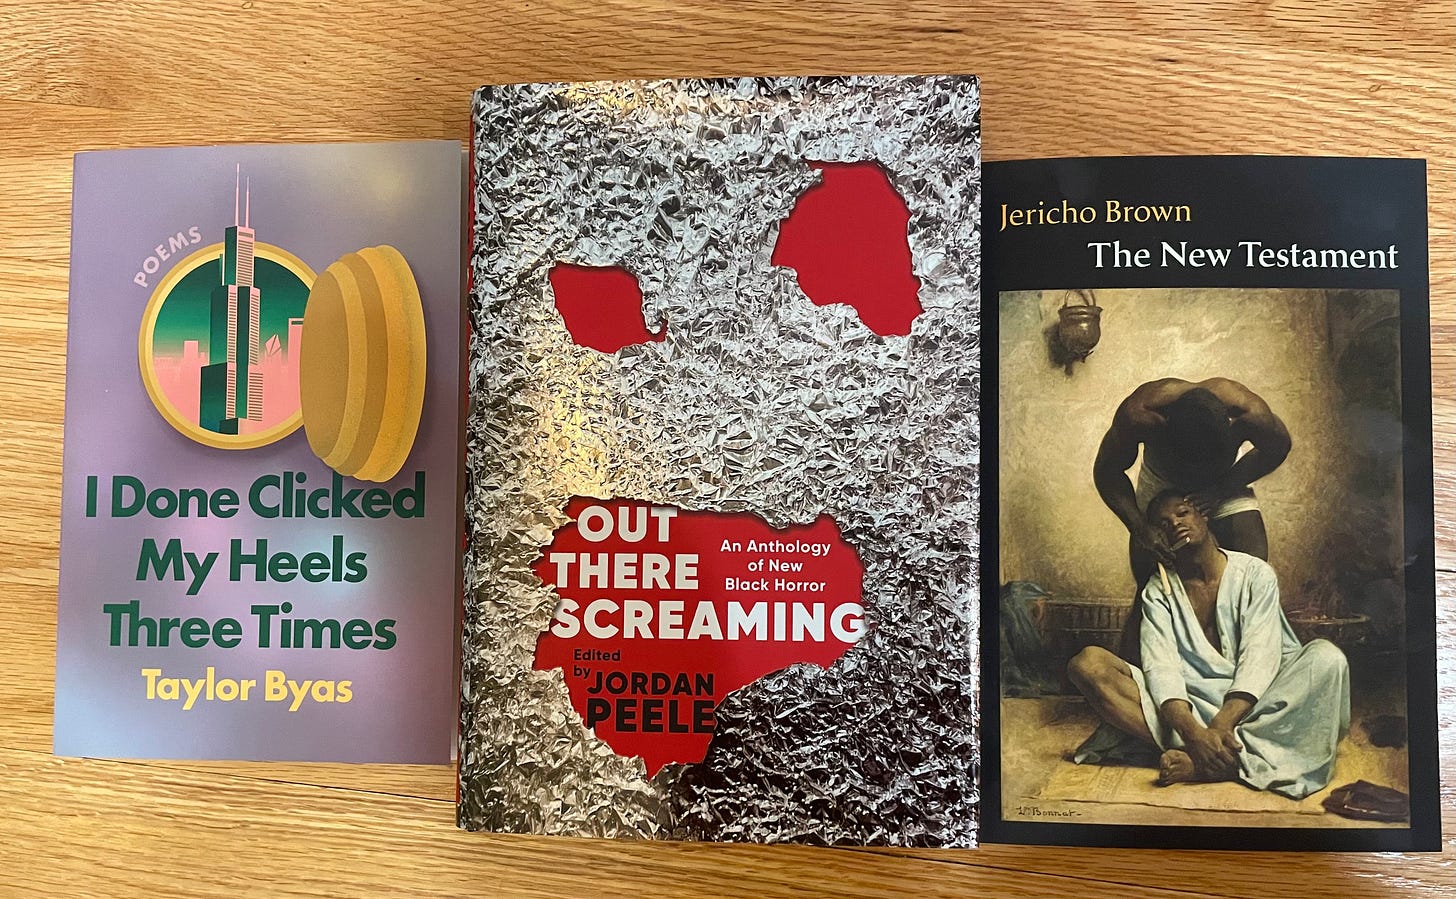 books: I Done Clicked My Heels Three Times by Taylor Byas, Out There Screaming edited by Jordan Peele, and The New Testament by Jericho Brown